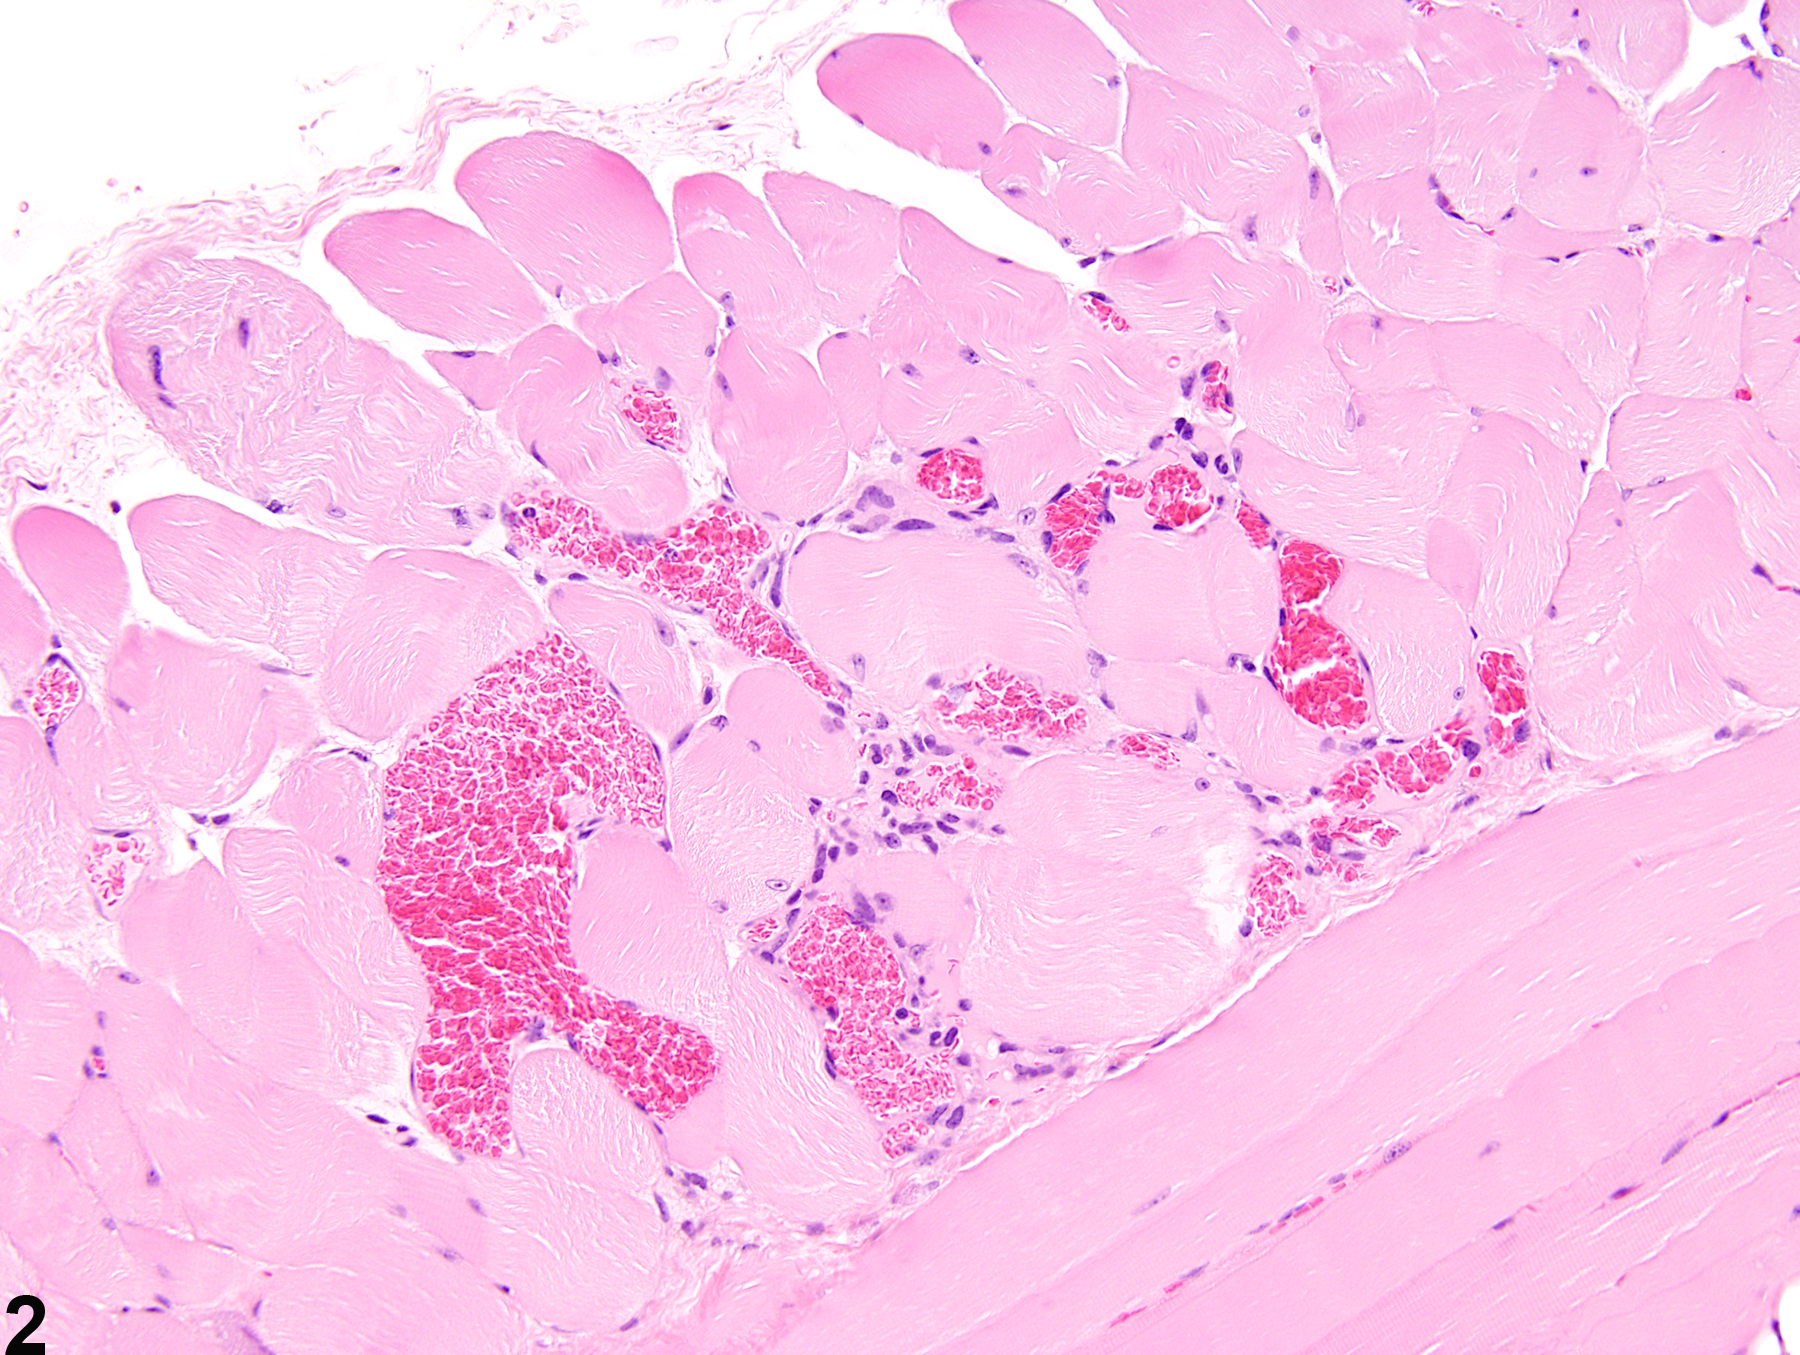 Image of angiectasis in the skeletal muscle from a male B6C3F1/N mouse in a chronic study